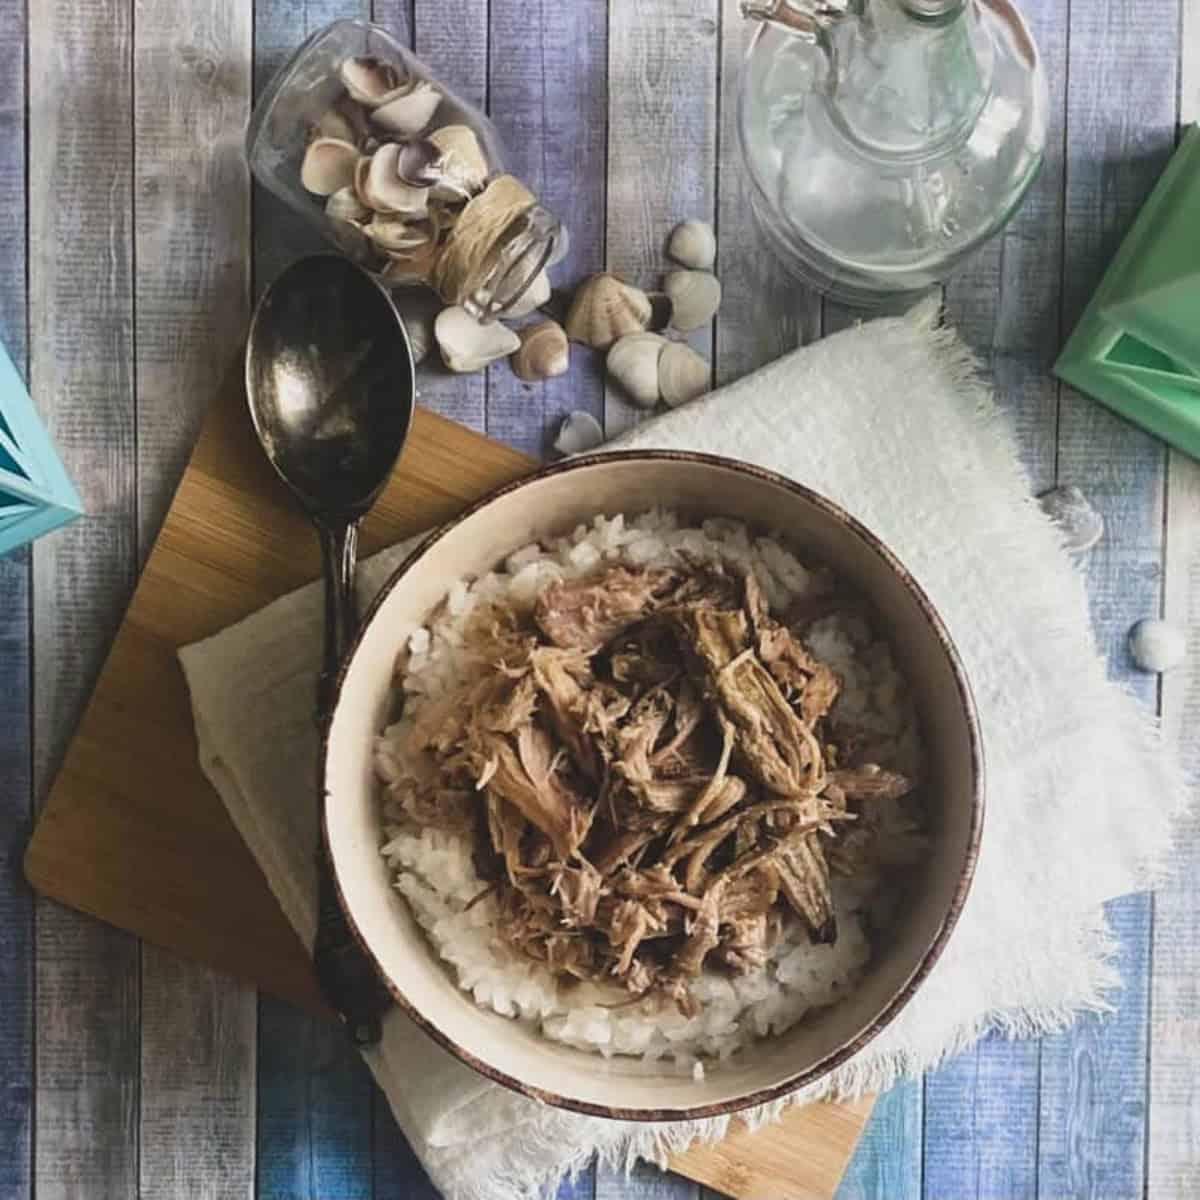 A close-up of a wooden table with a bowl of shredded brown pulled smoked kalua pork on top of white rice.